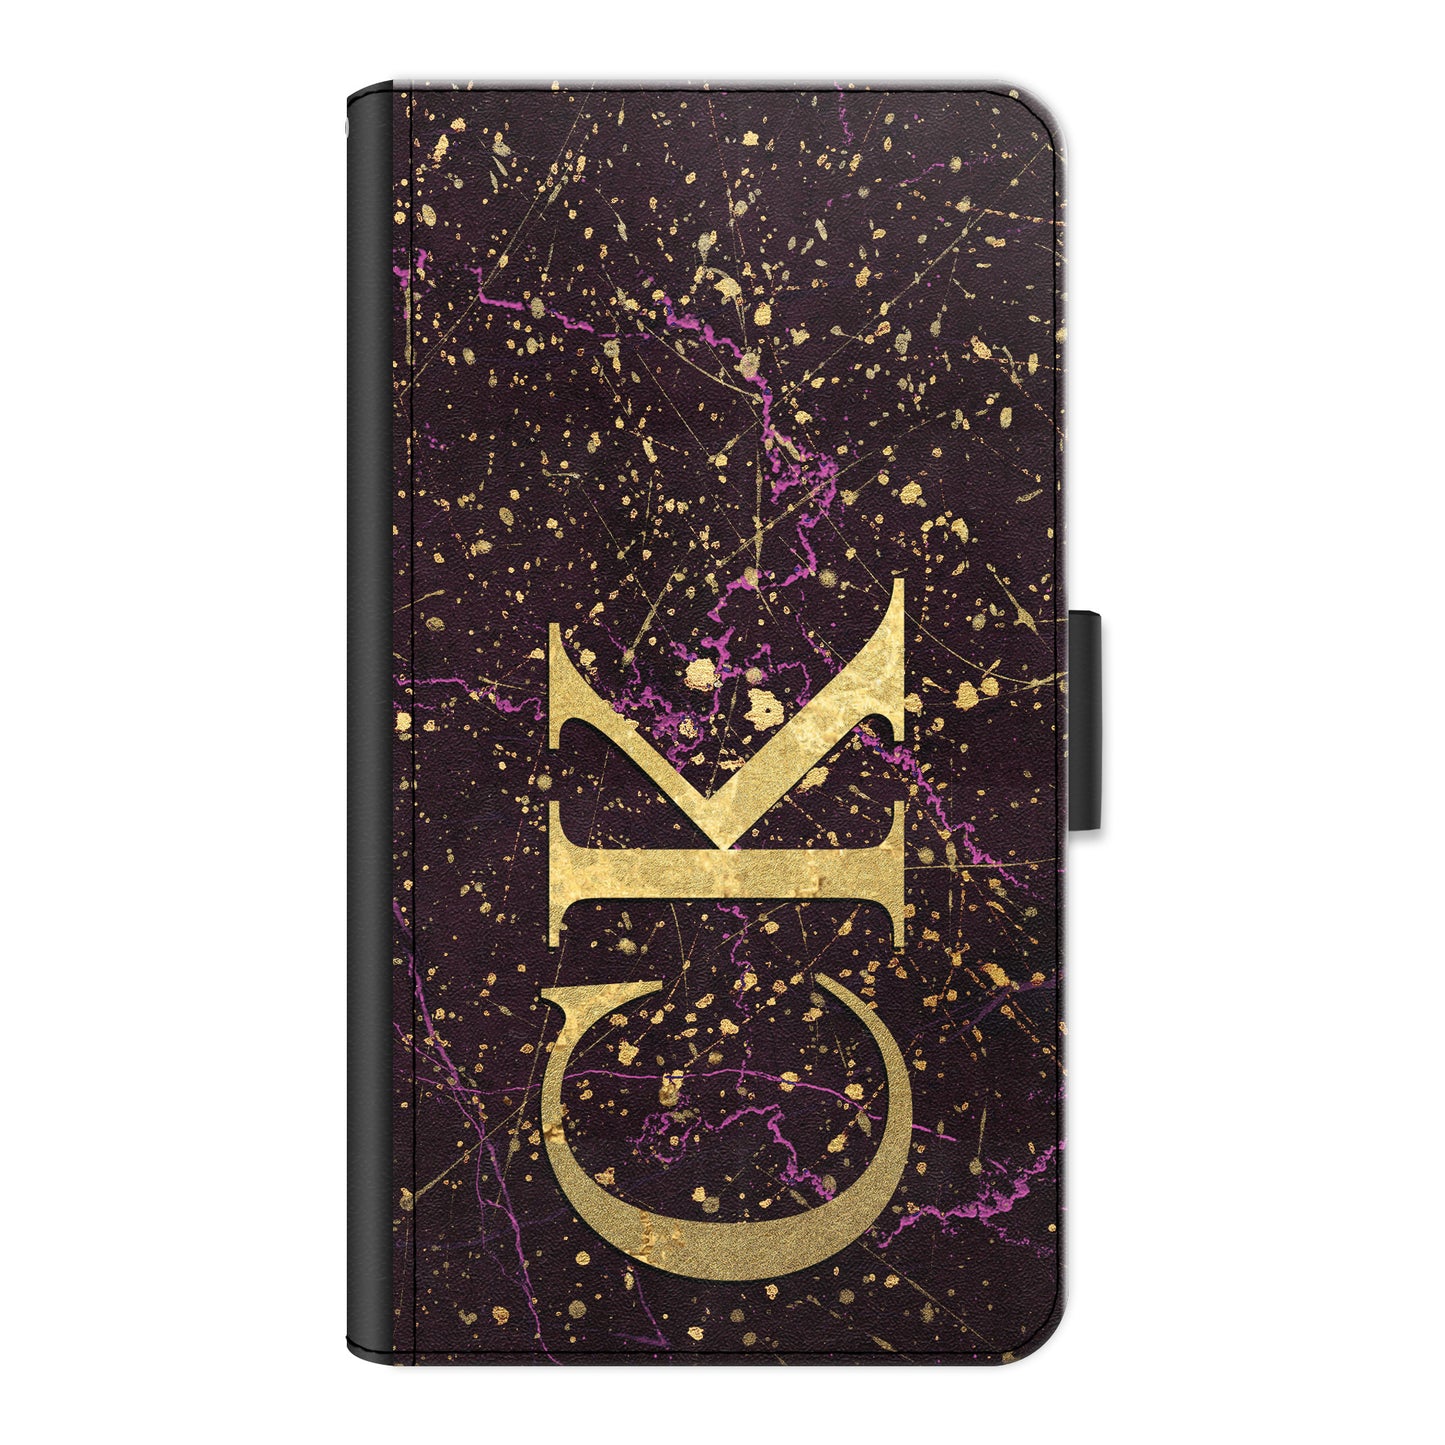 Personalised Samsung Galaxy Phone Leather Wallet with Gold Initials on Pink and Gold Infused Black Marble